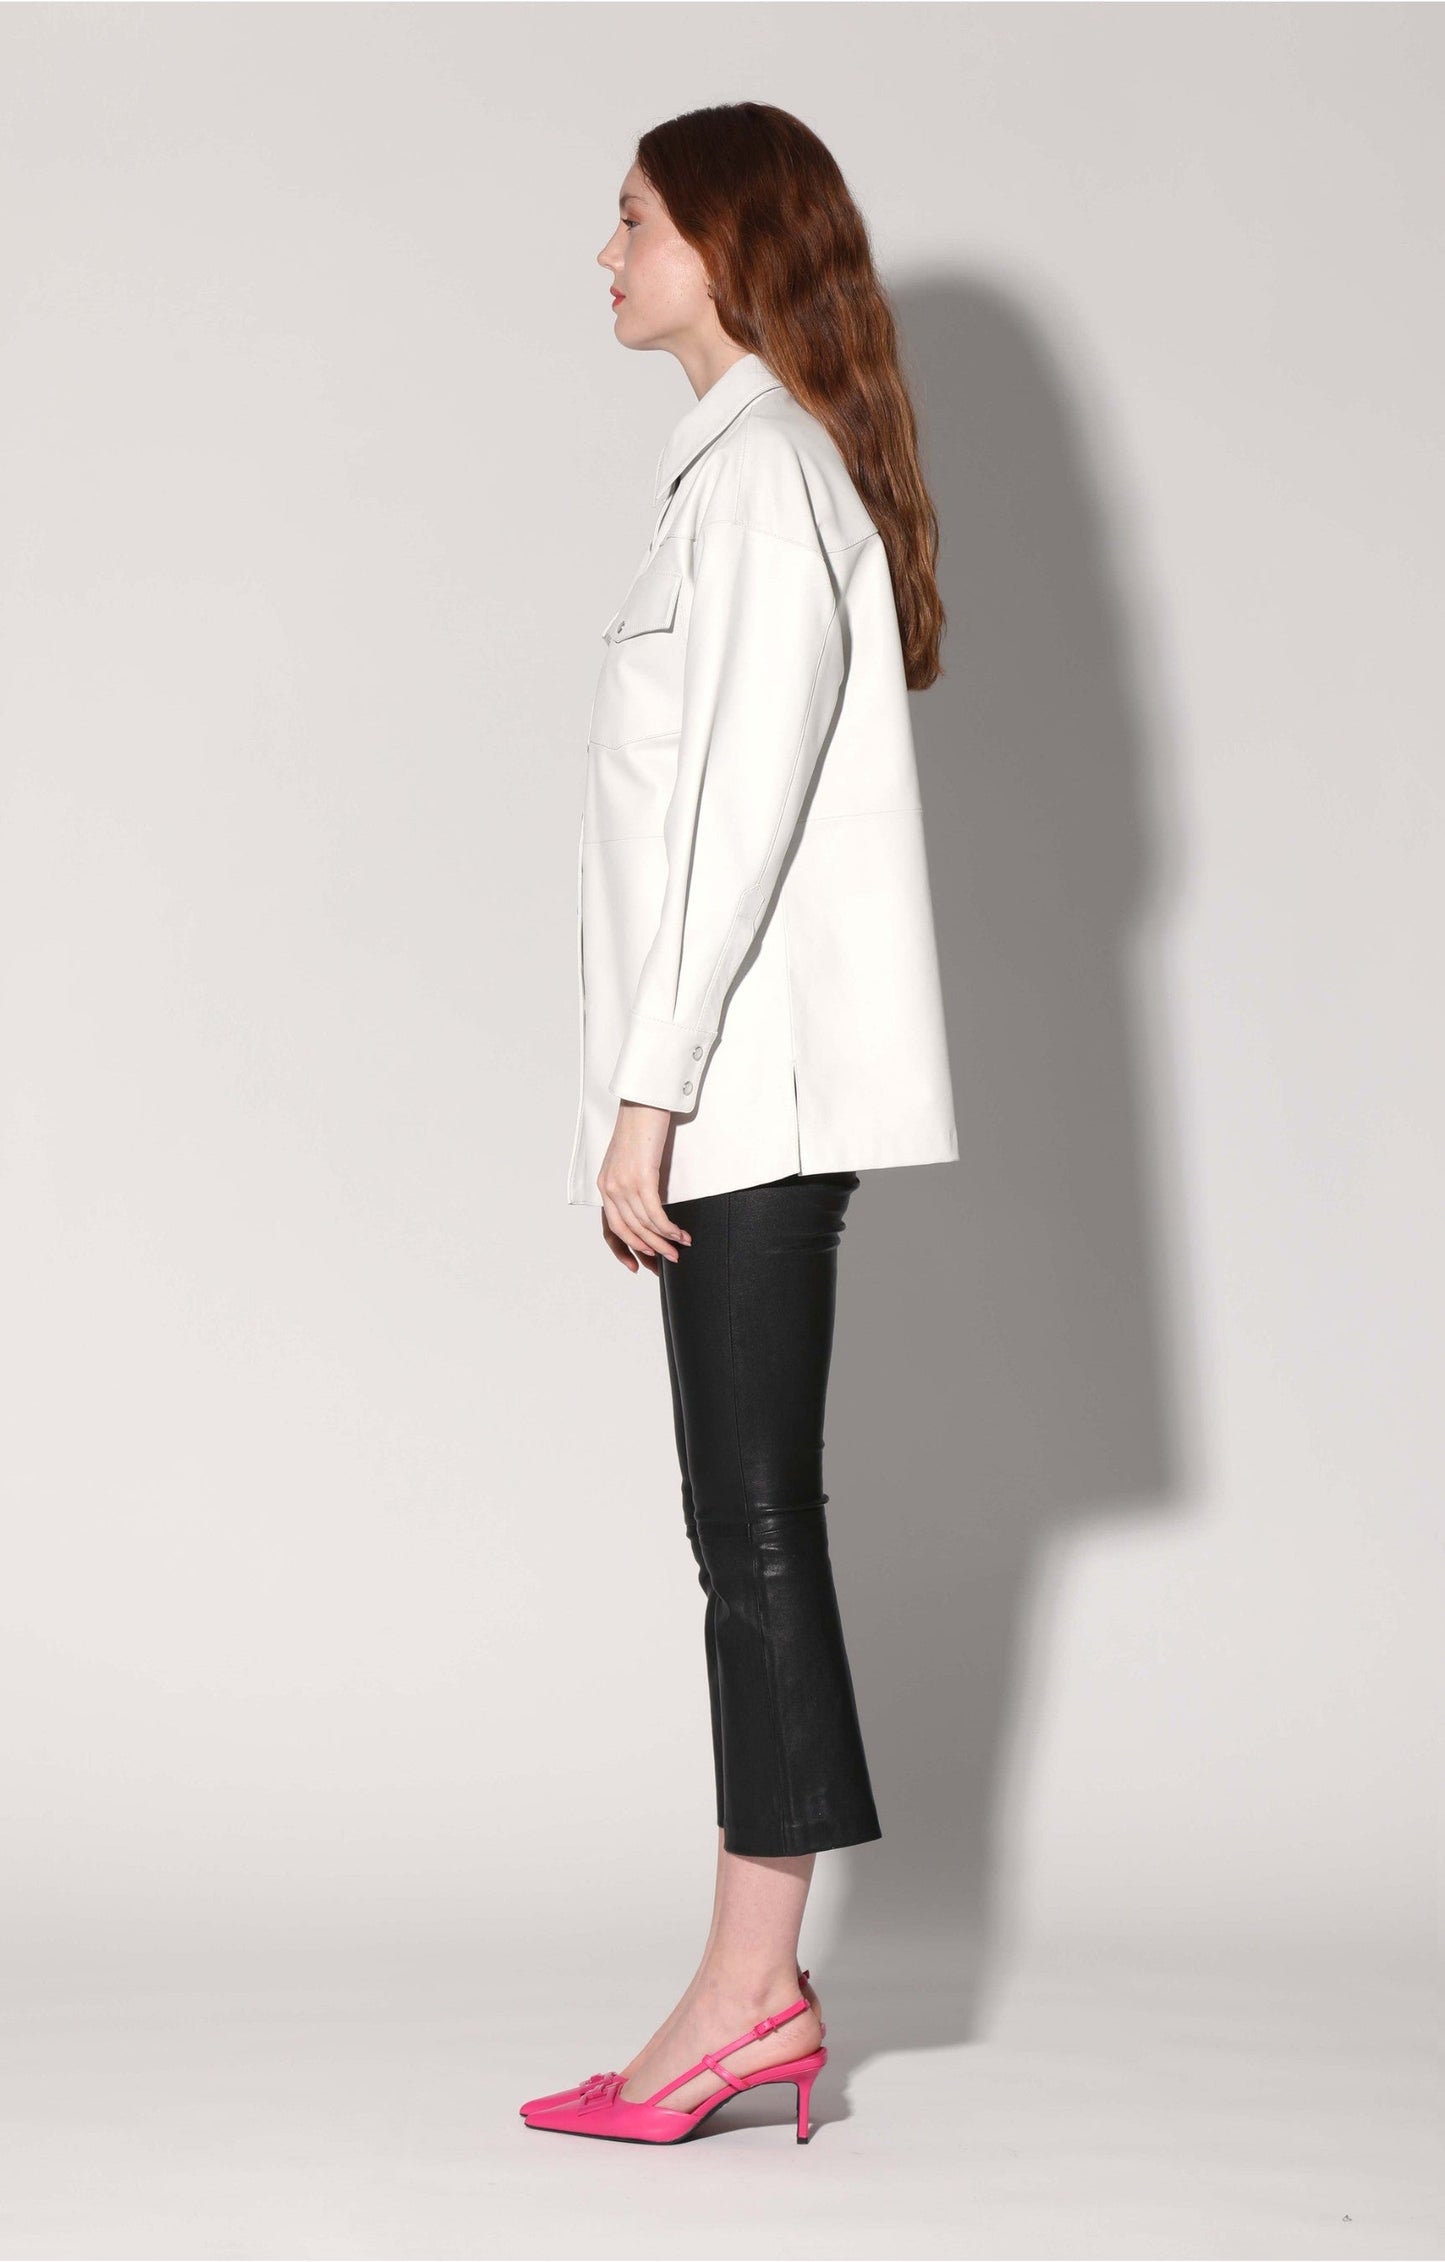 Shandi Top, Bright White - Leather by Walter Baker